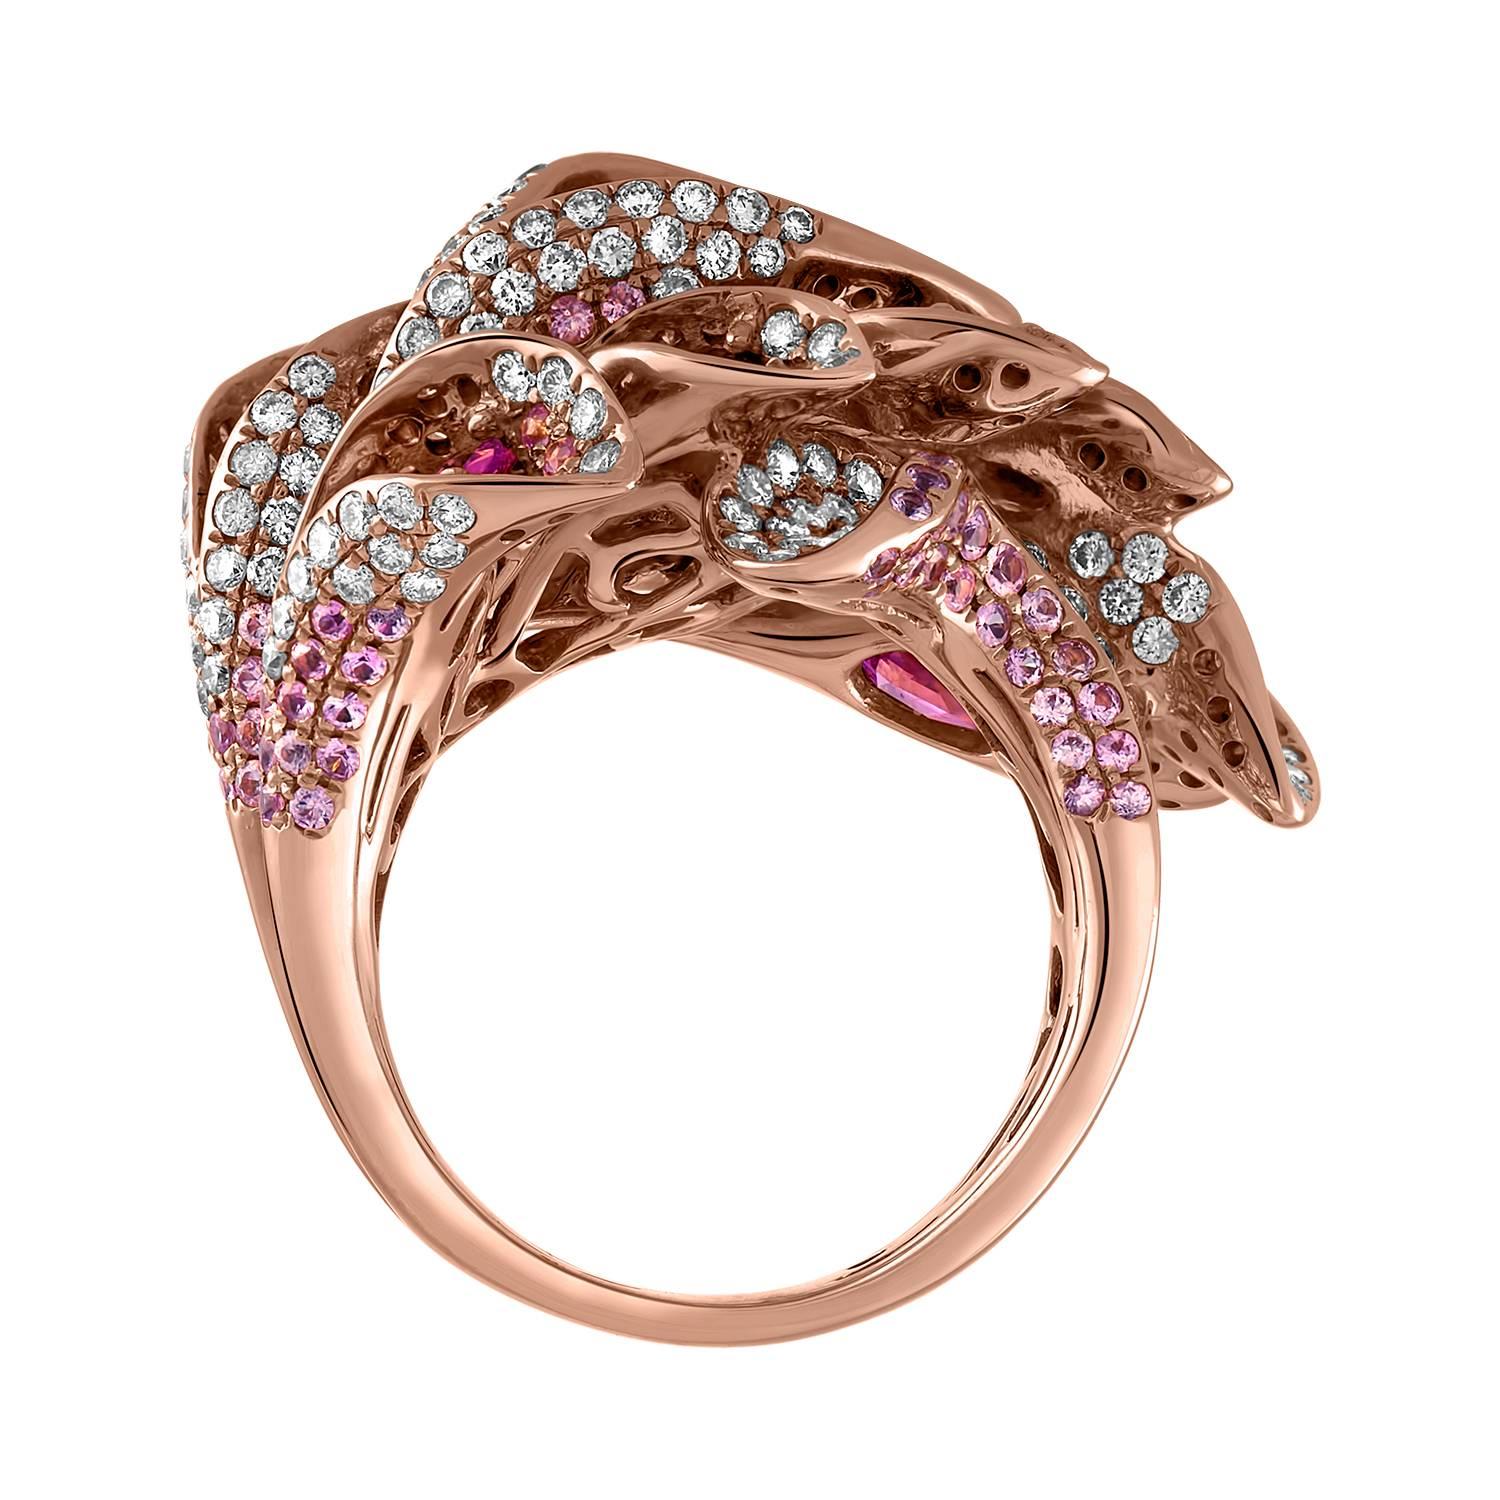 Oval Cut 18 Karat Rose Gold, Diamond and 6.61 Carat Pink Sapphire Flower Cocktail Ring For Sale